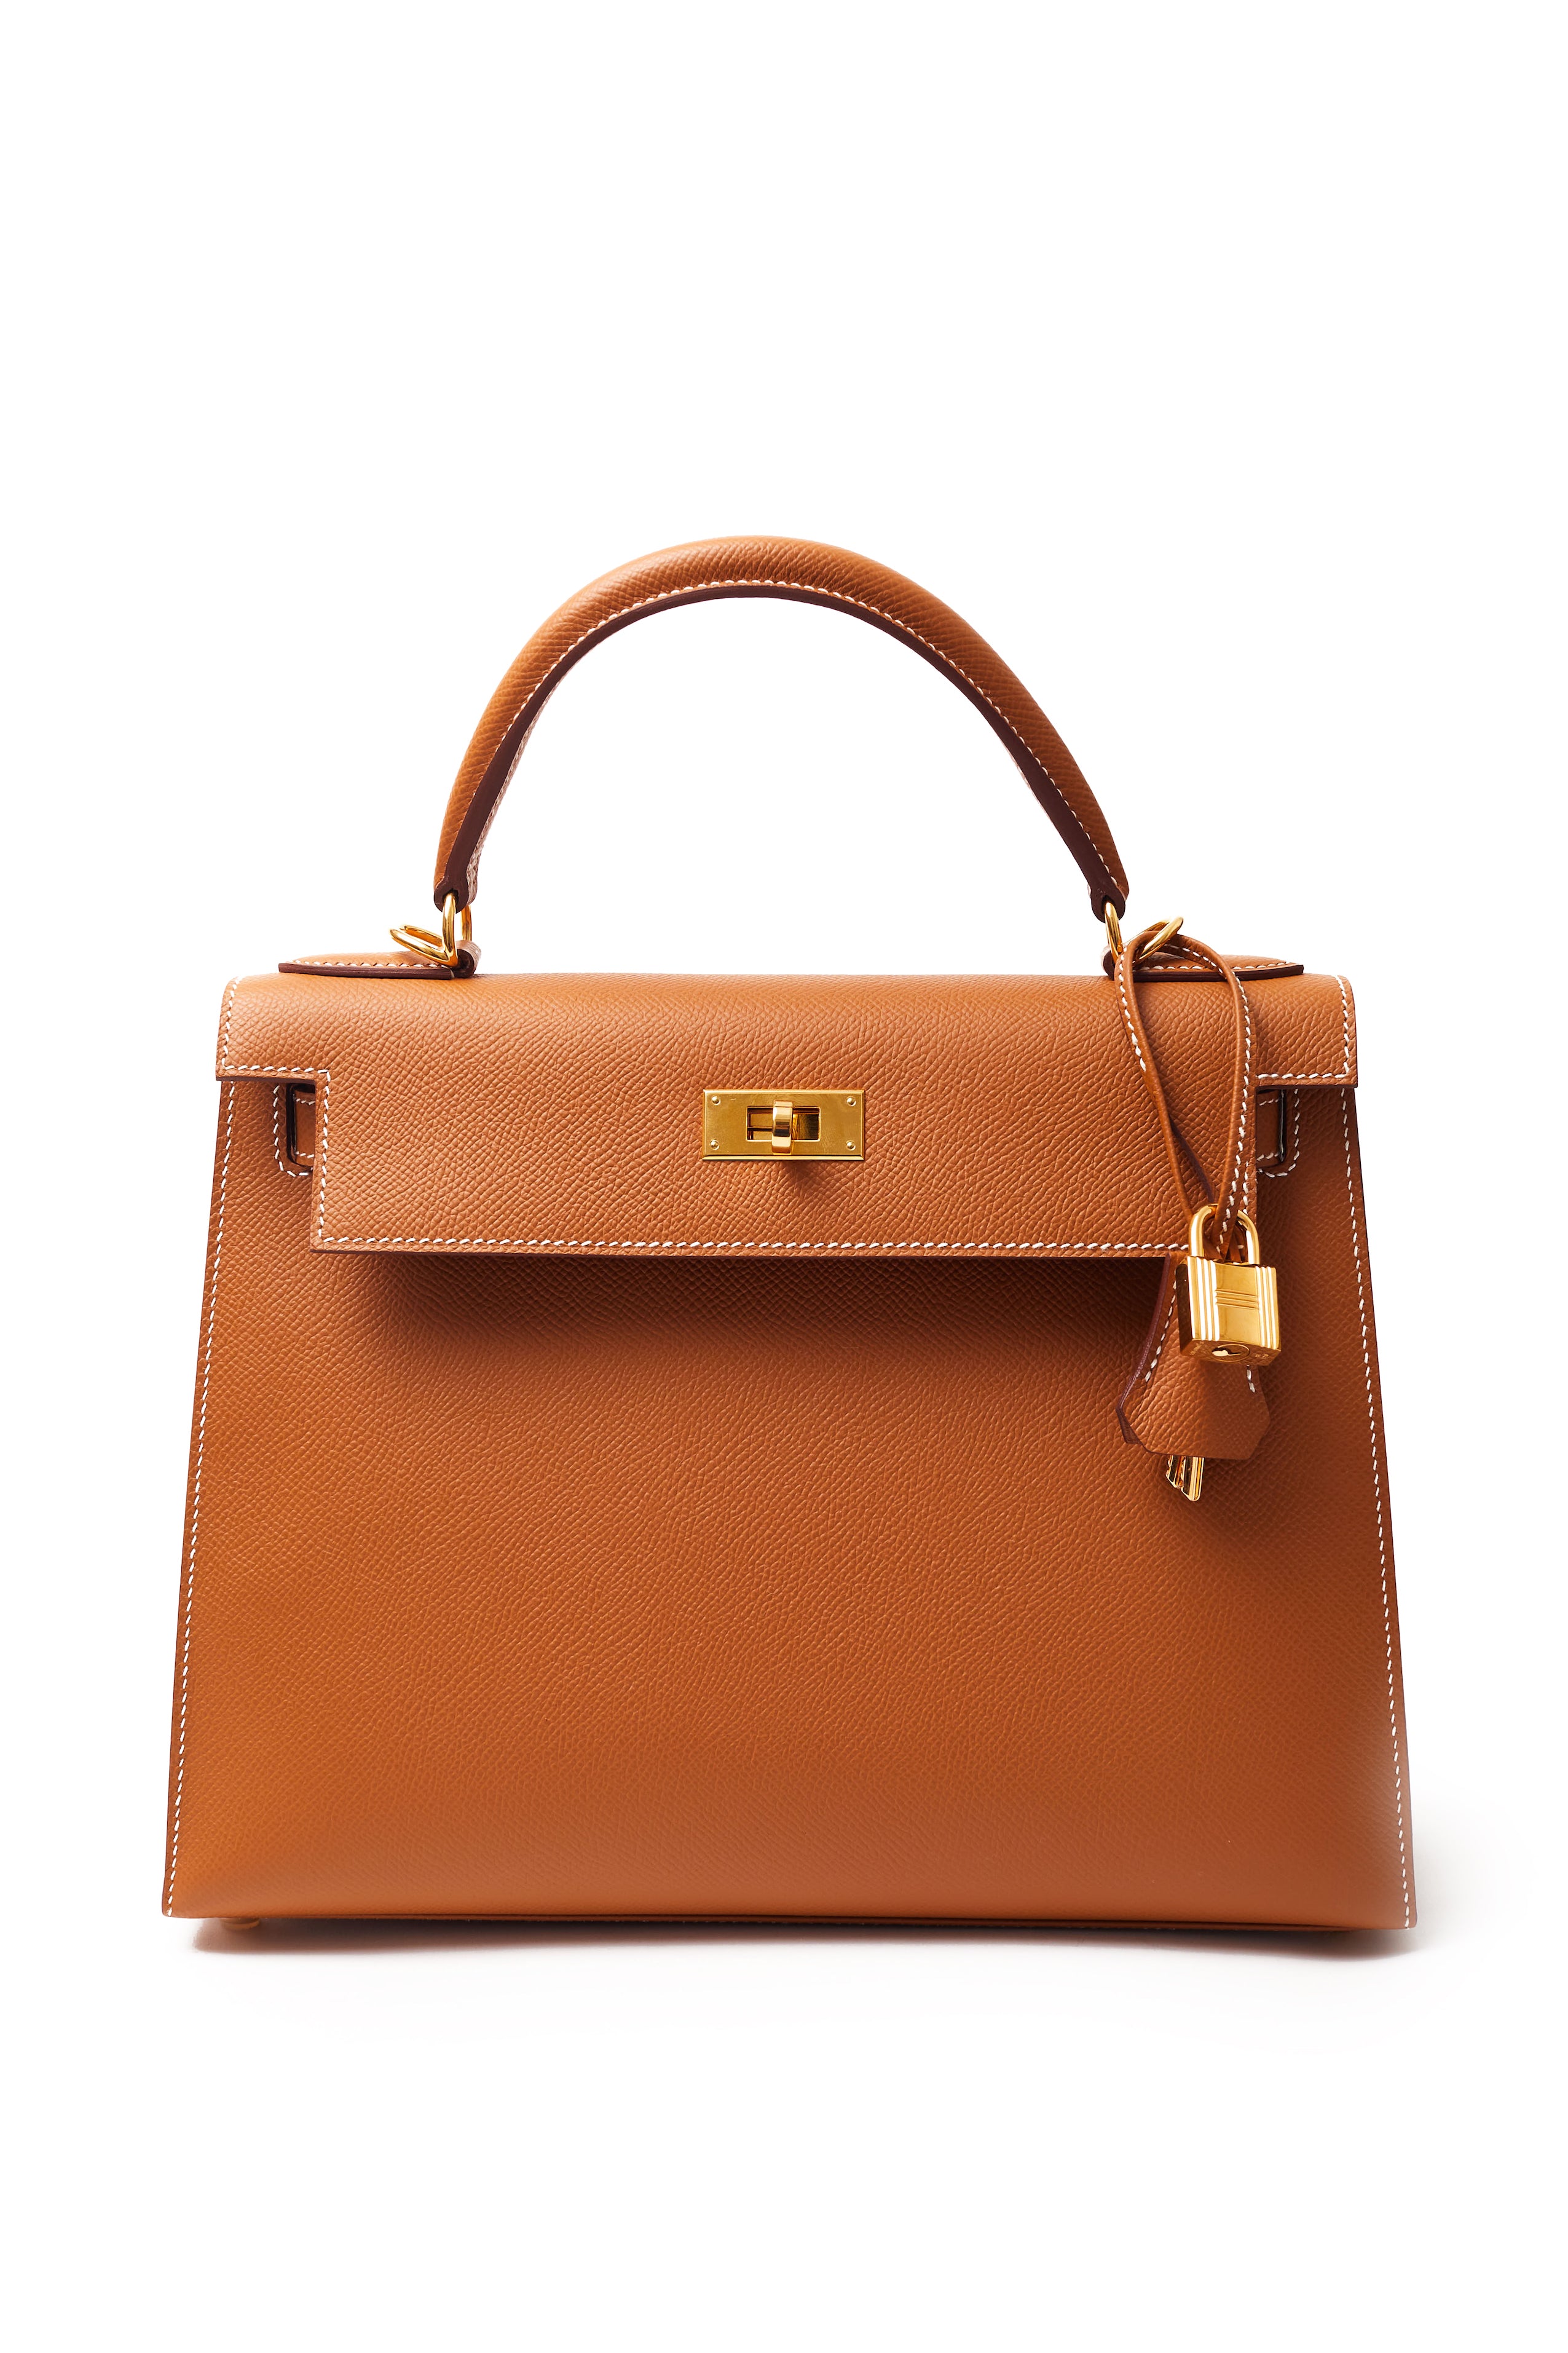 Hermès Paris <br> 2019 Kelly 28 in Gold Veau Epsom leather with Gold hardware